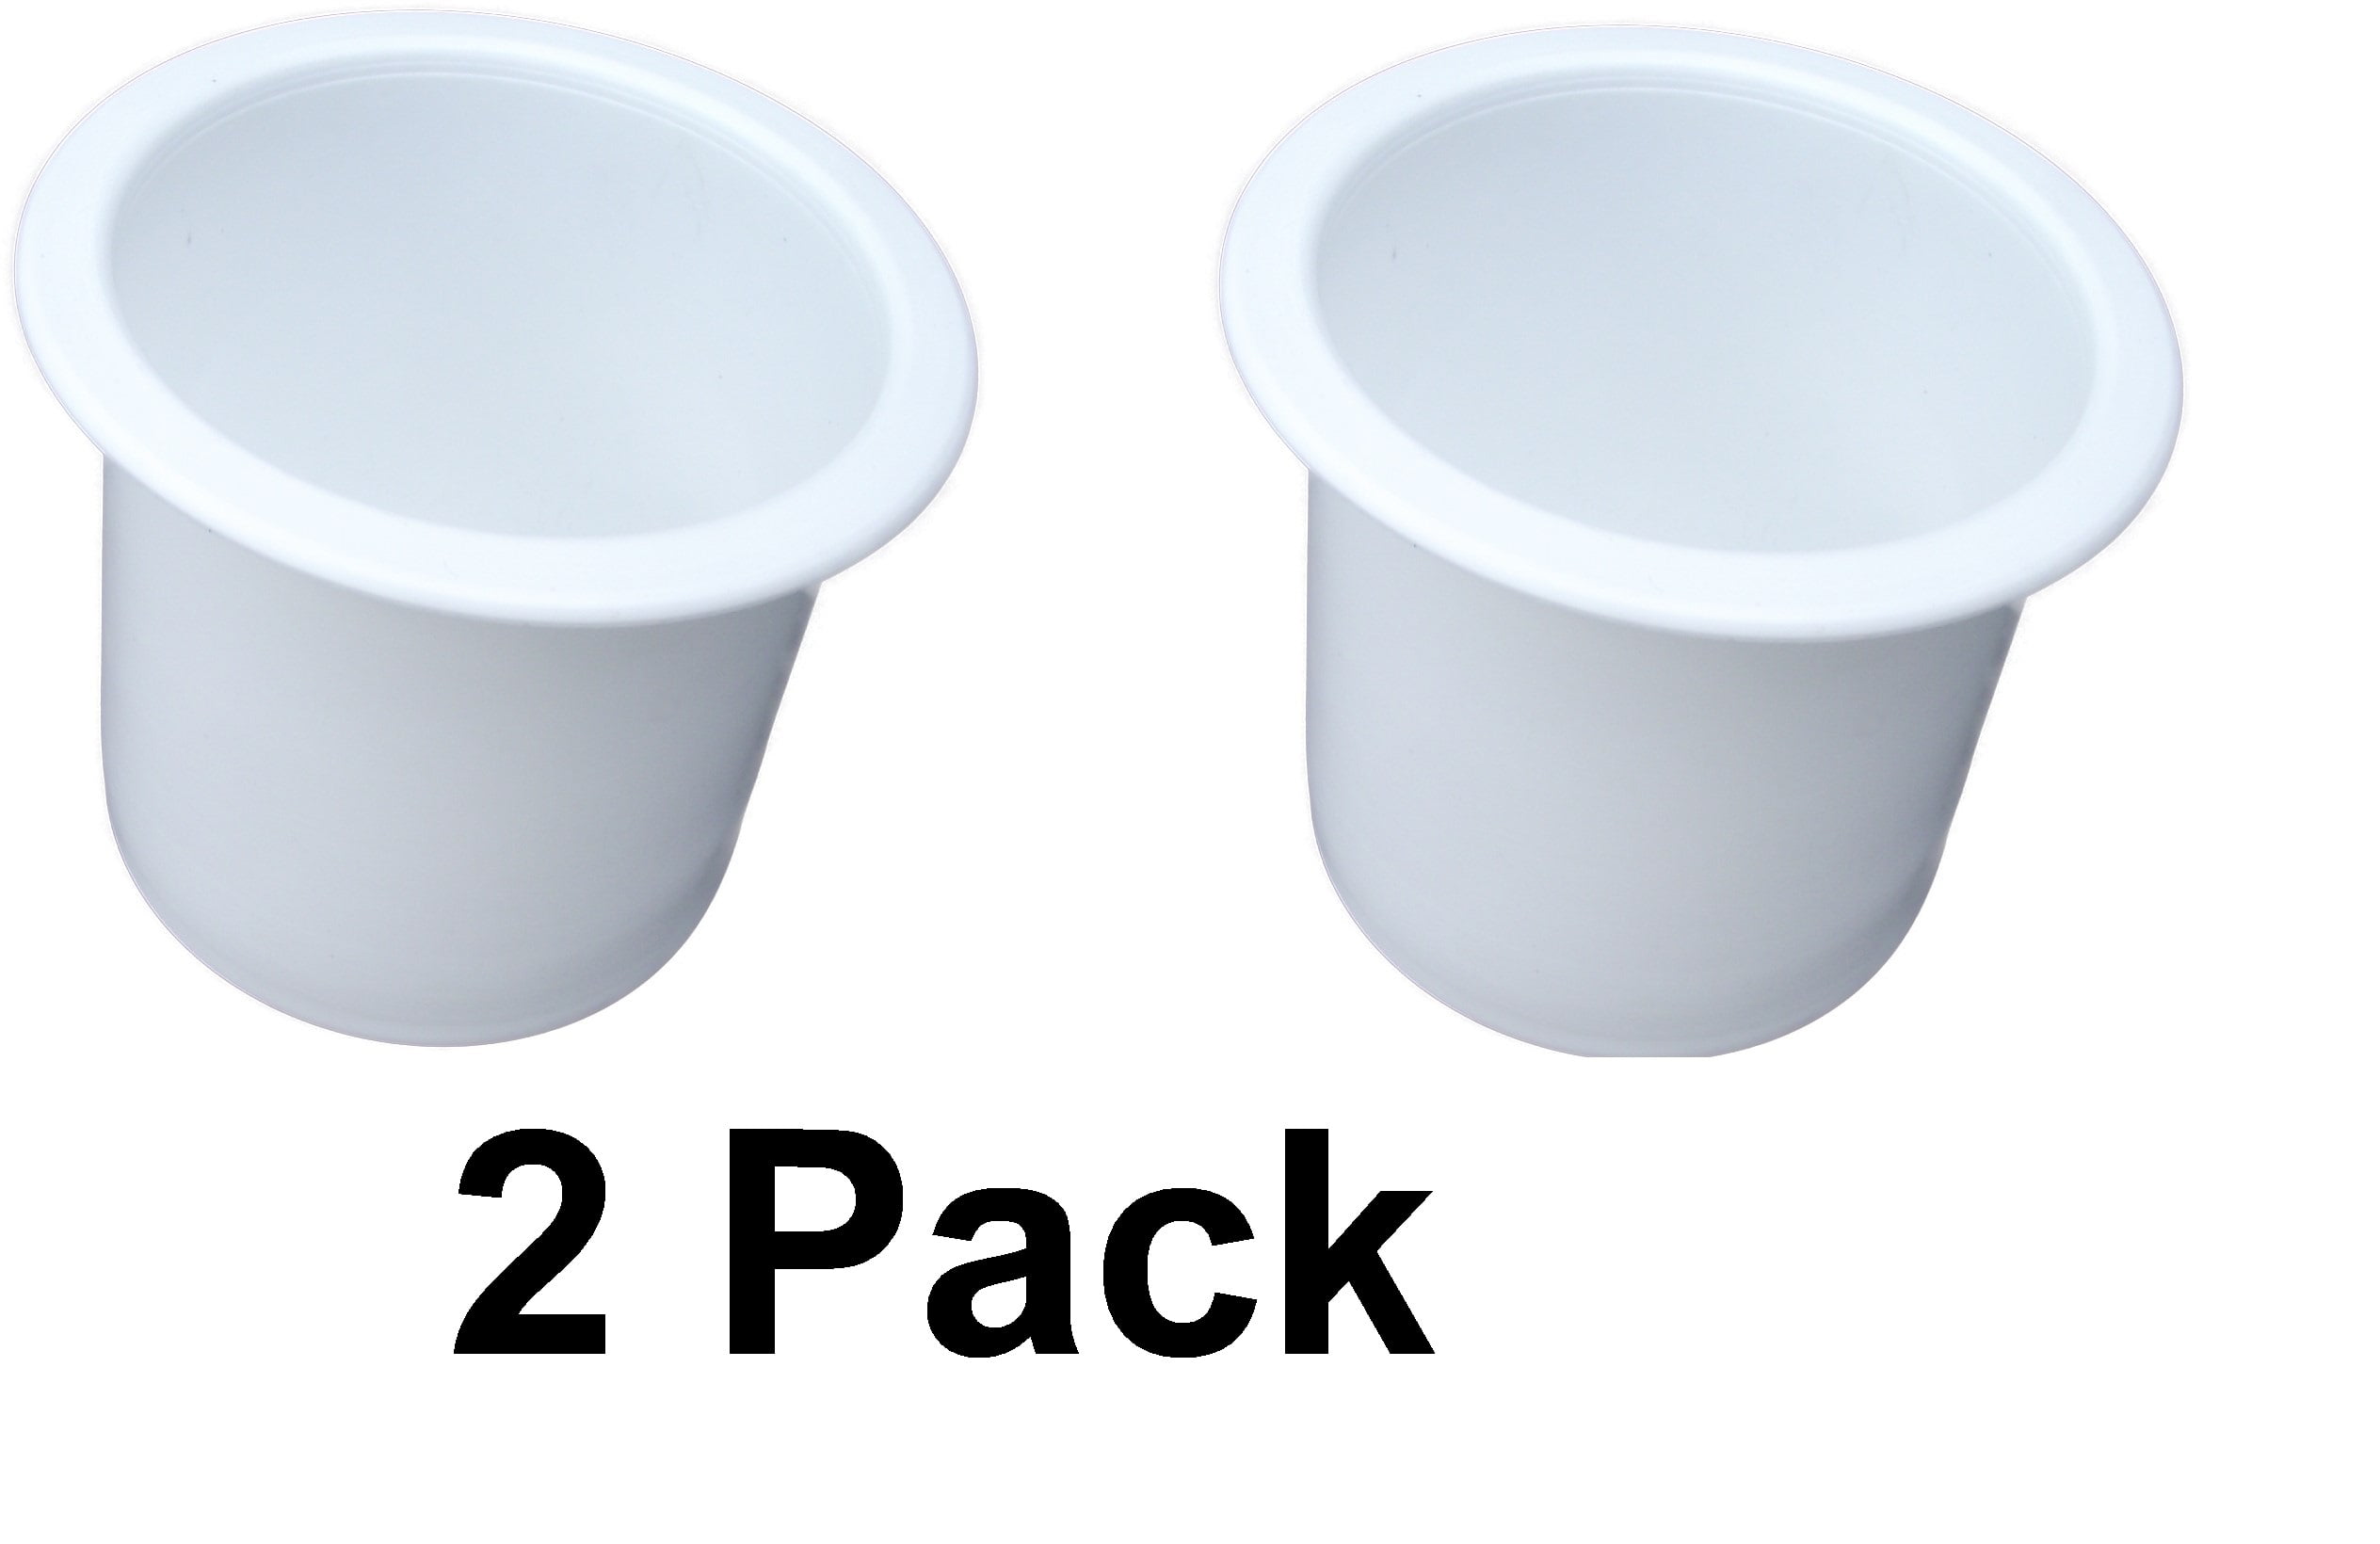 Cup Holders - Double Cup Holder Latest Price, Manufacturers